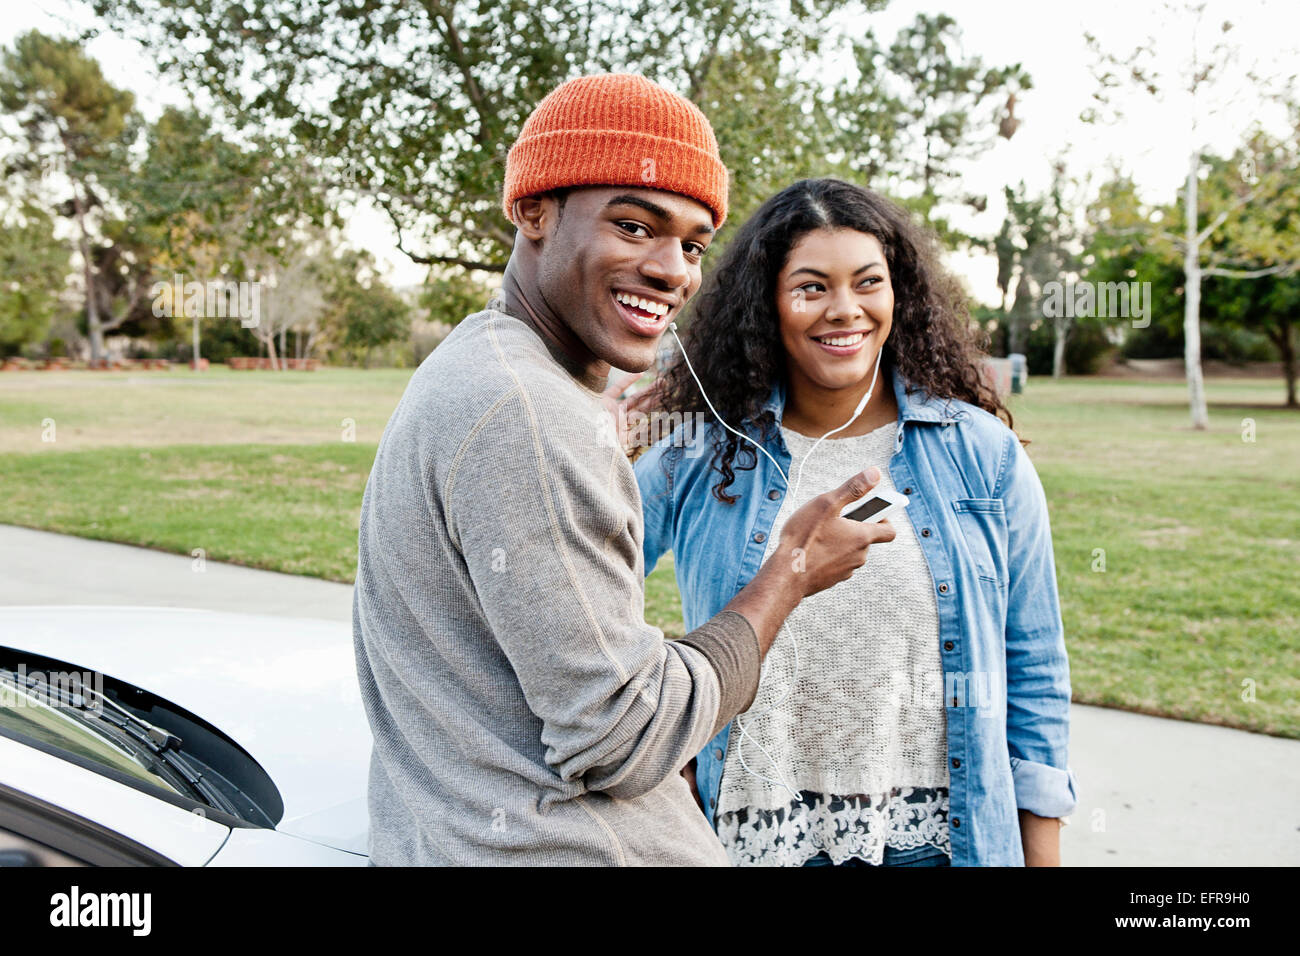 Portrait of young couple in car park sharing smartphone music Stock Photo